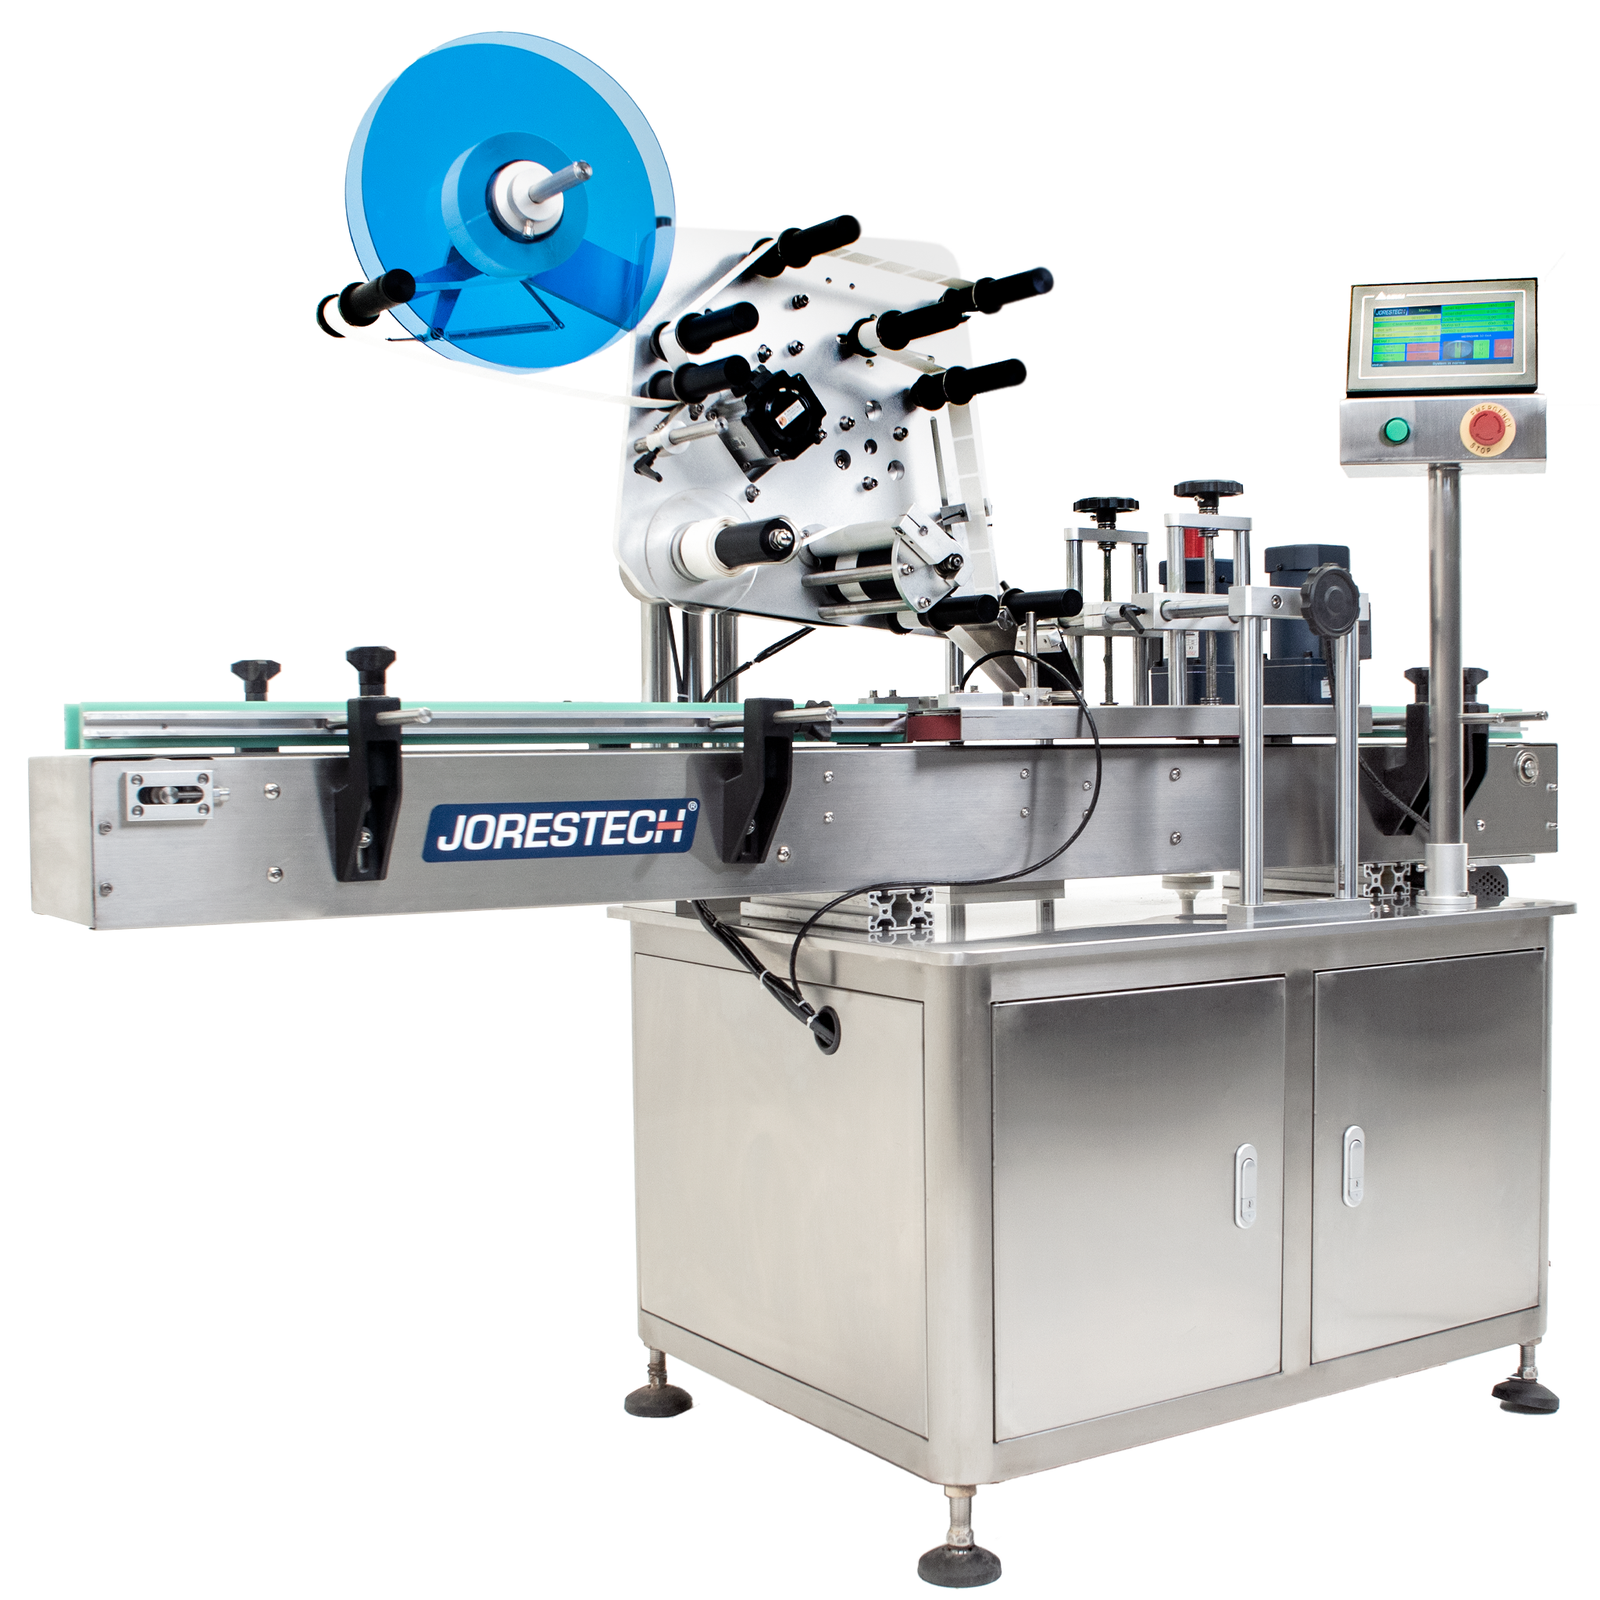 Front view of the JORESTECH stainless steel automatic label applicator over white background